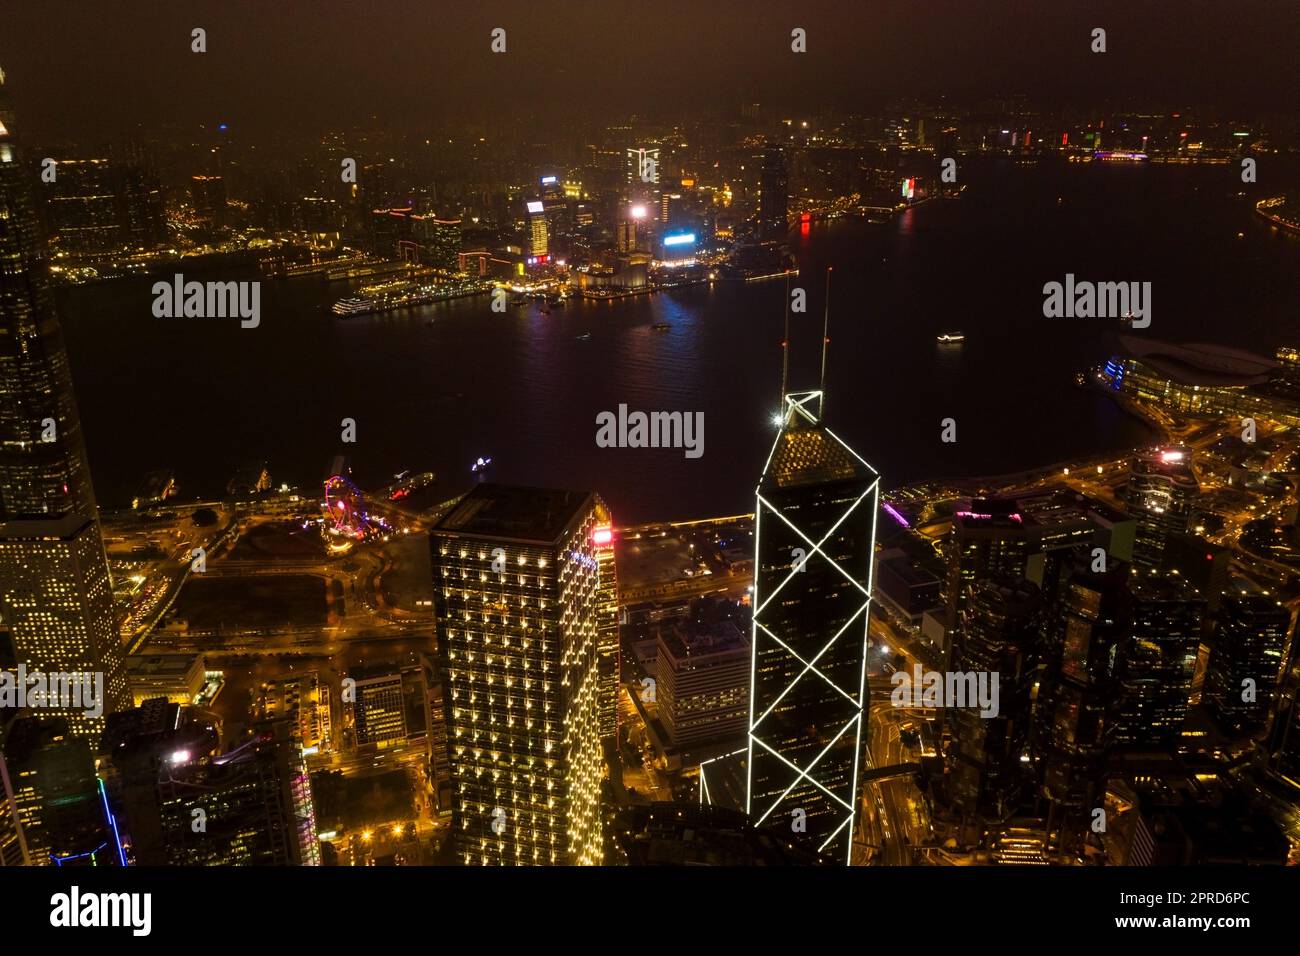 The city that never sleeps. Aerial shot of skyscrapers, office blocks and other commercial buildings in a busy coastal city. Stock Photo